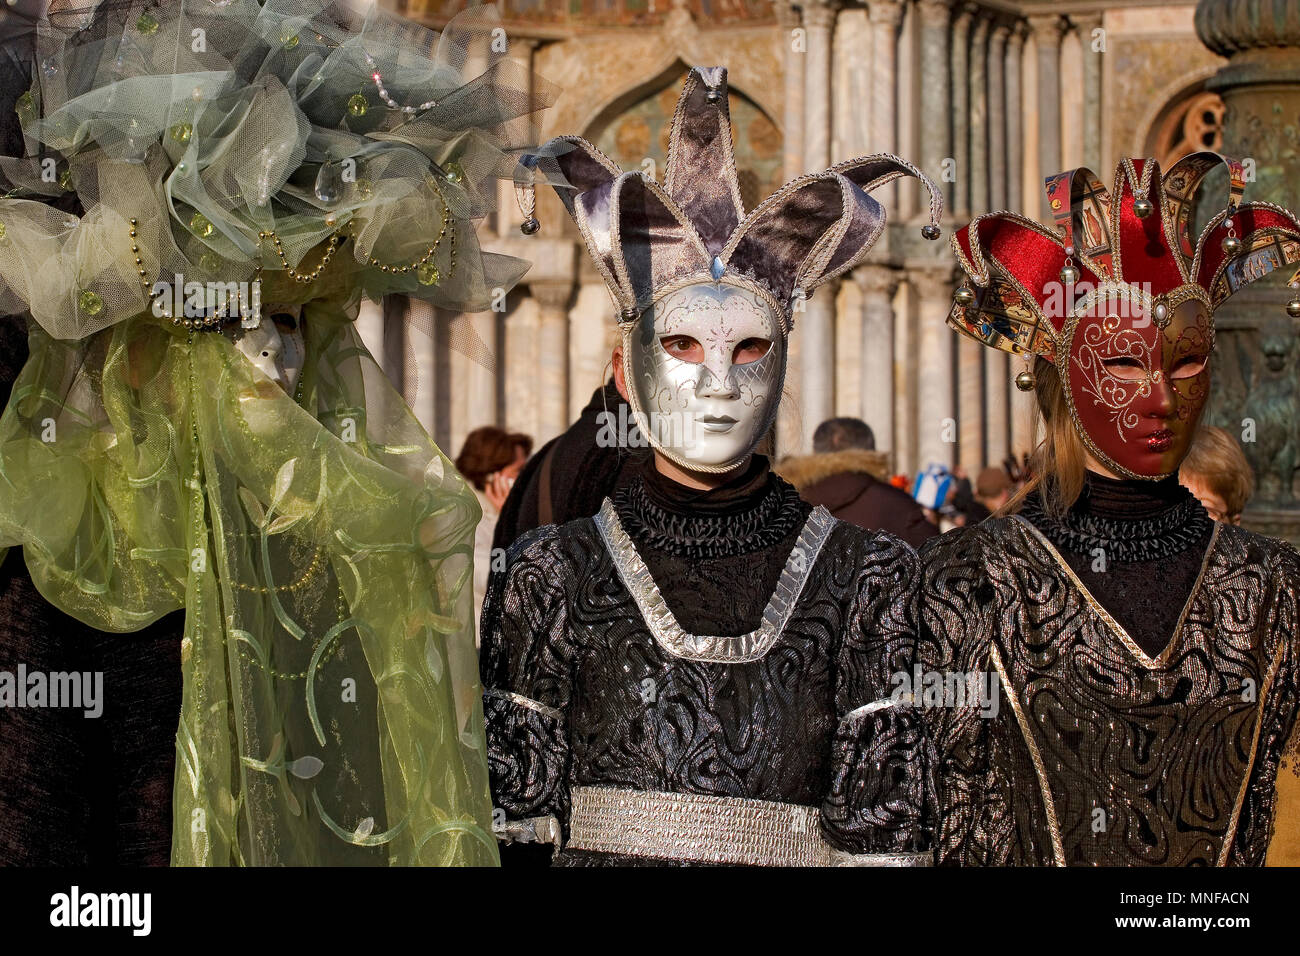 Piazza San Marco, Venice, Italy: maskers pose in front of the Basilica di San Marco Stock Photo